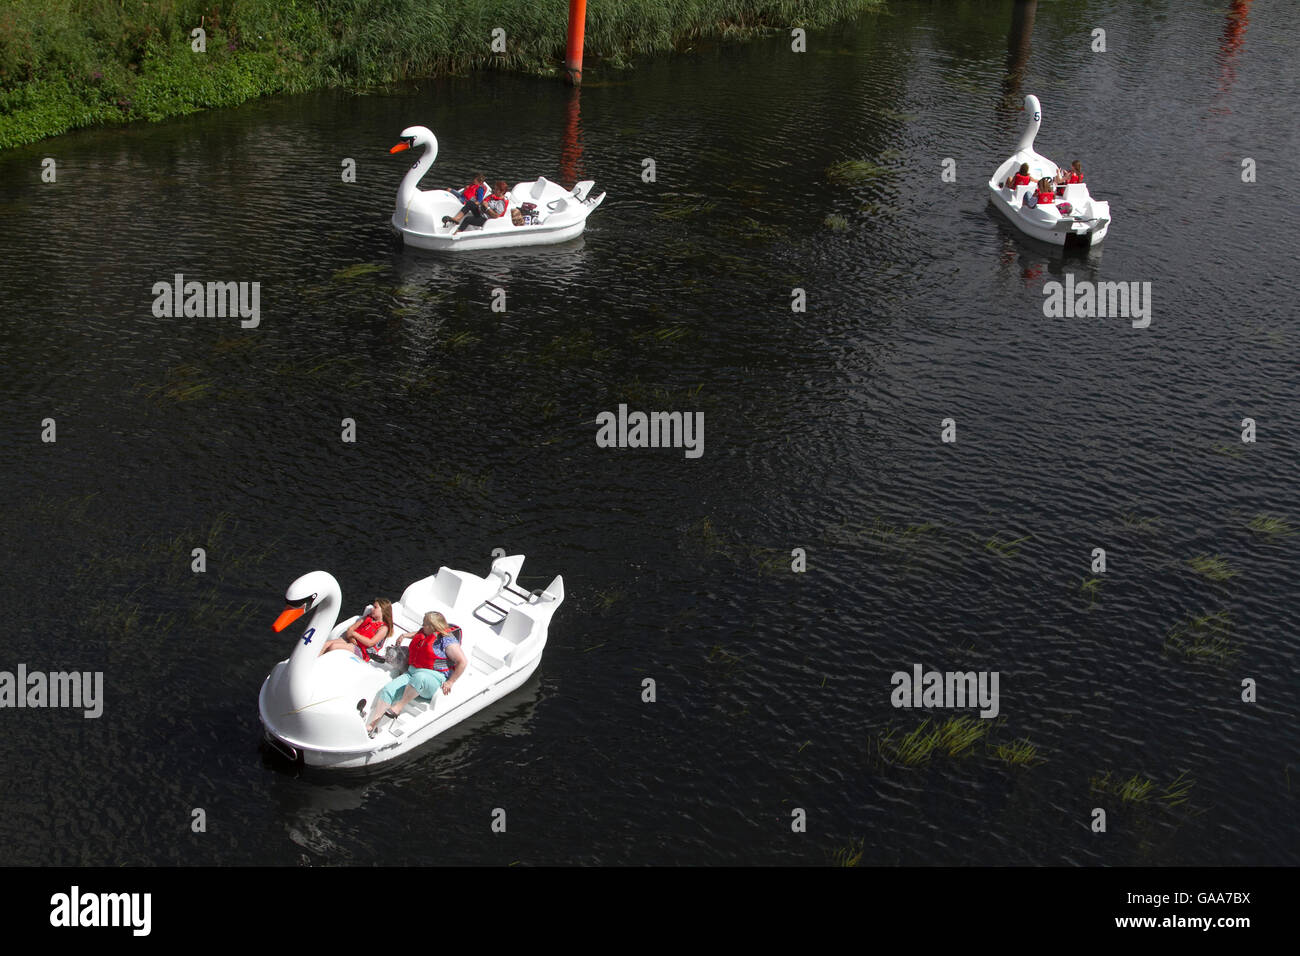 London,UK. 5th August 2016. People take advantage of the warm and sunny weather to  ride on swan pedalos around the Olympic park in Stratford  © amer ghazzal/Alamy Live News Credit:  amer ghazzal/Alamy Live News Stock Photo